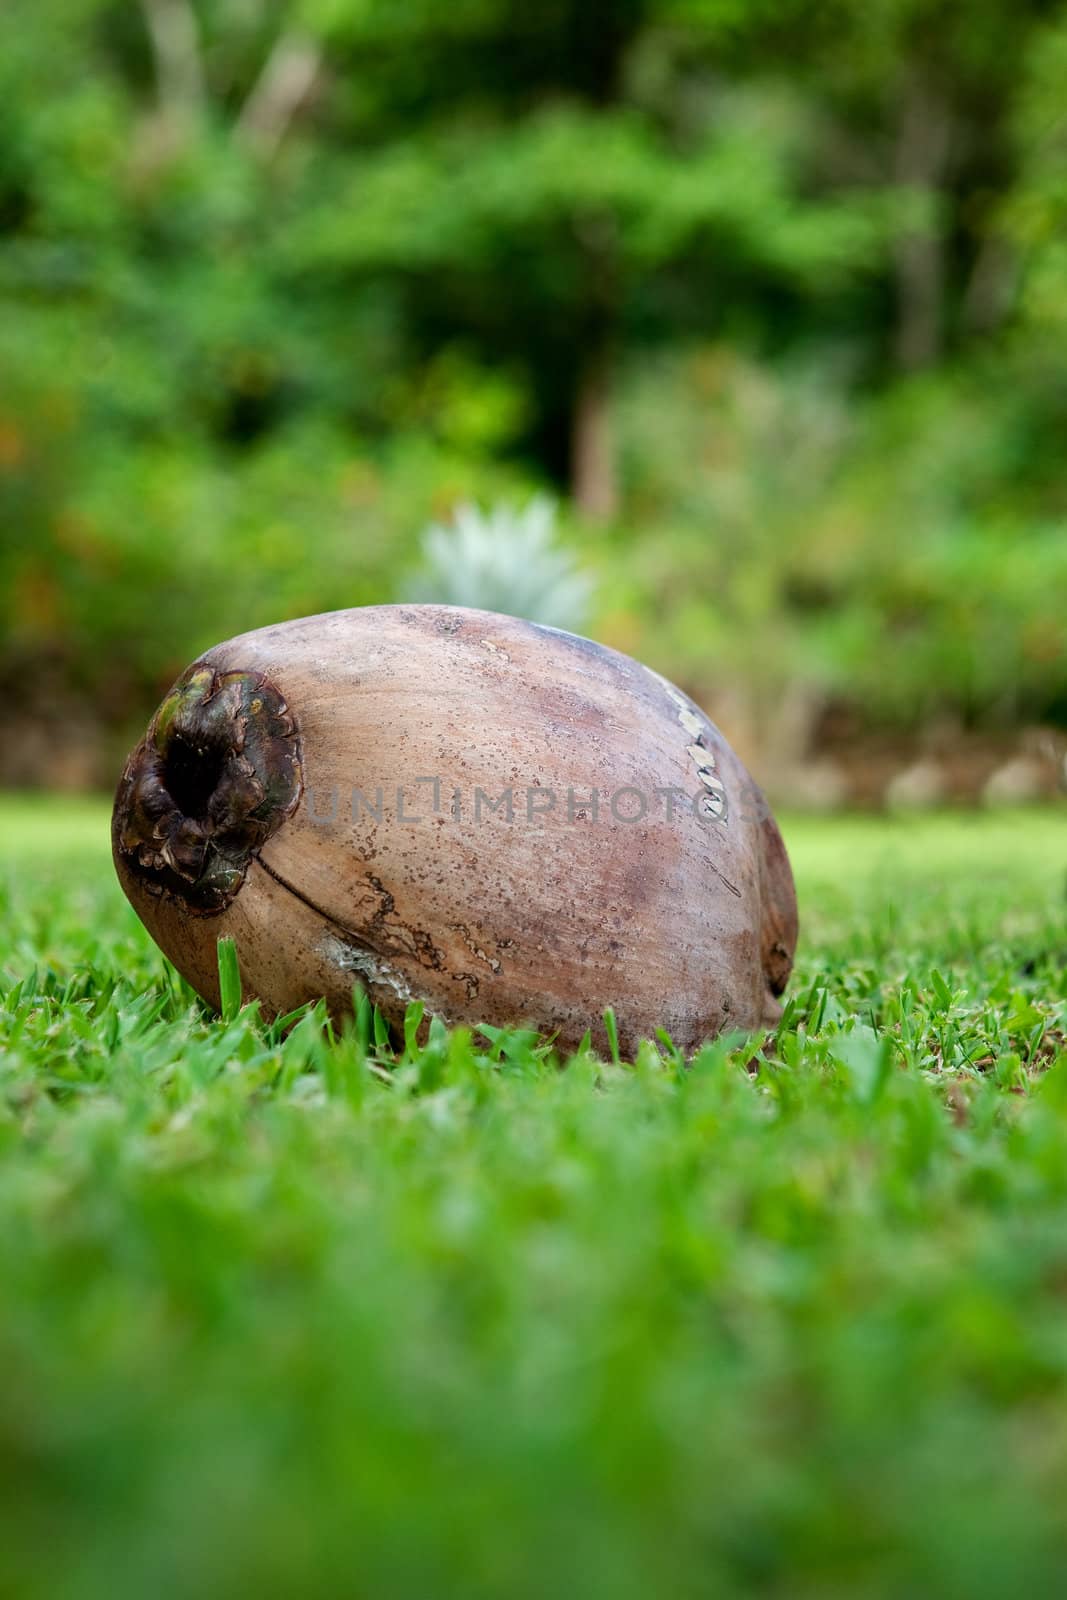 A coconut fallen on the grass